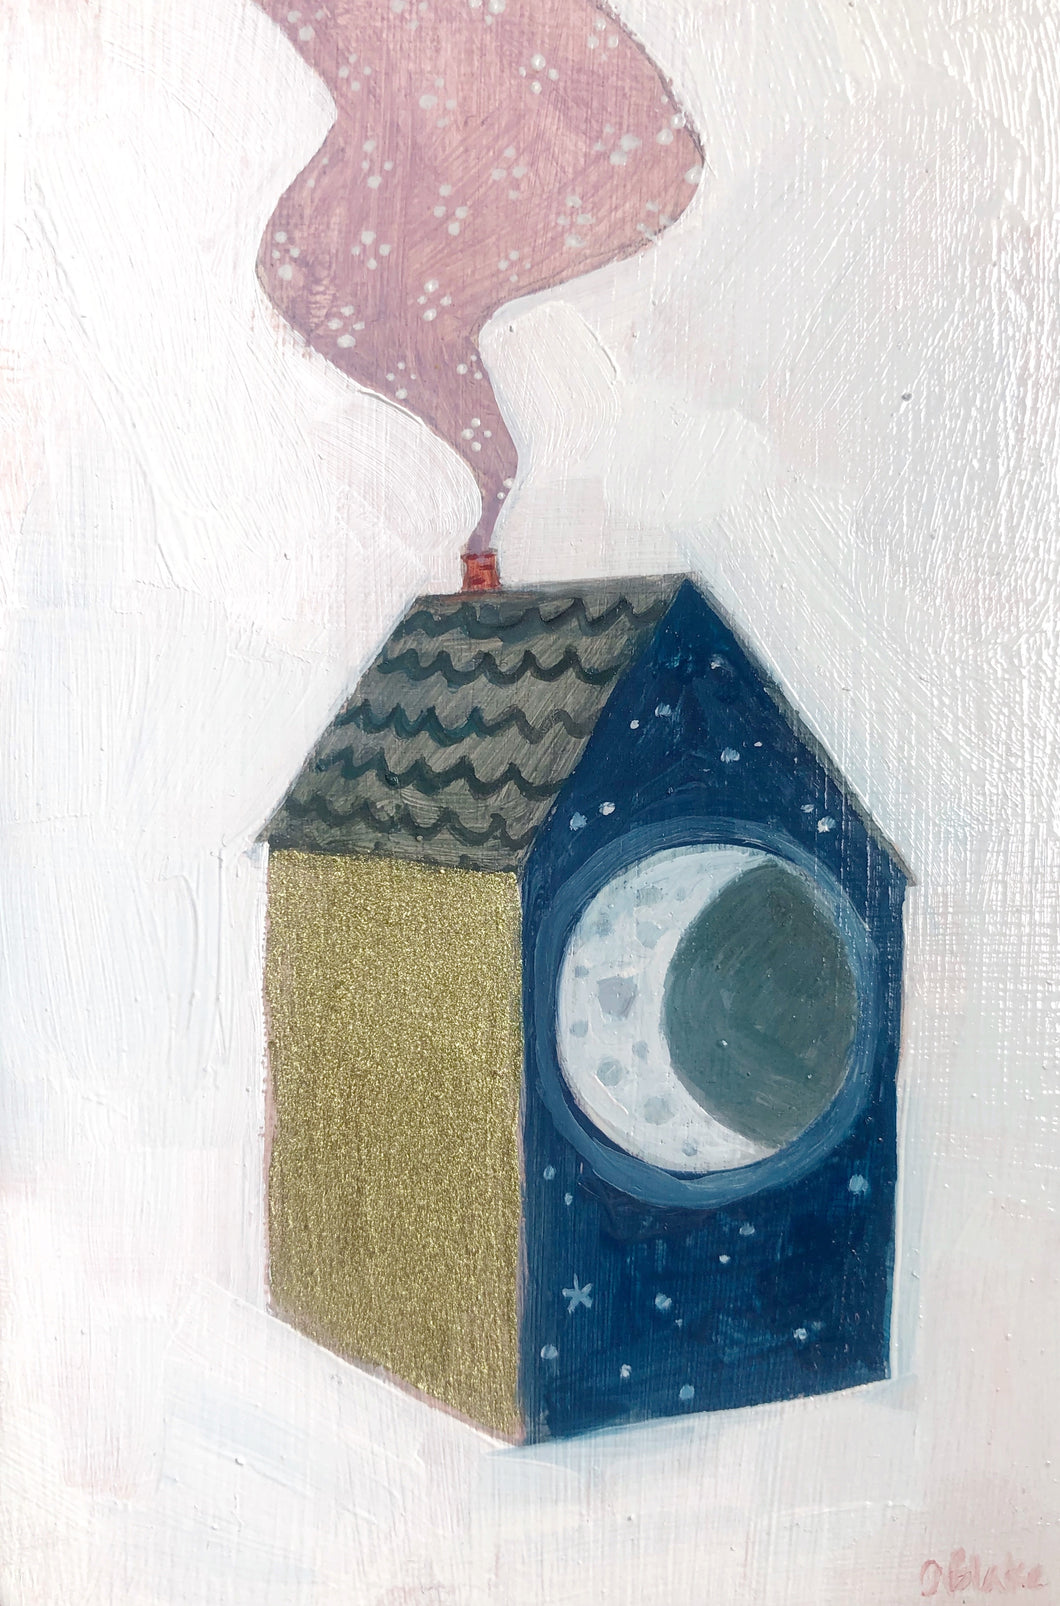 A home made of moonlight and wisdom